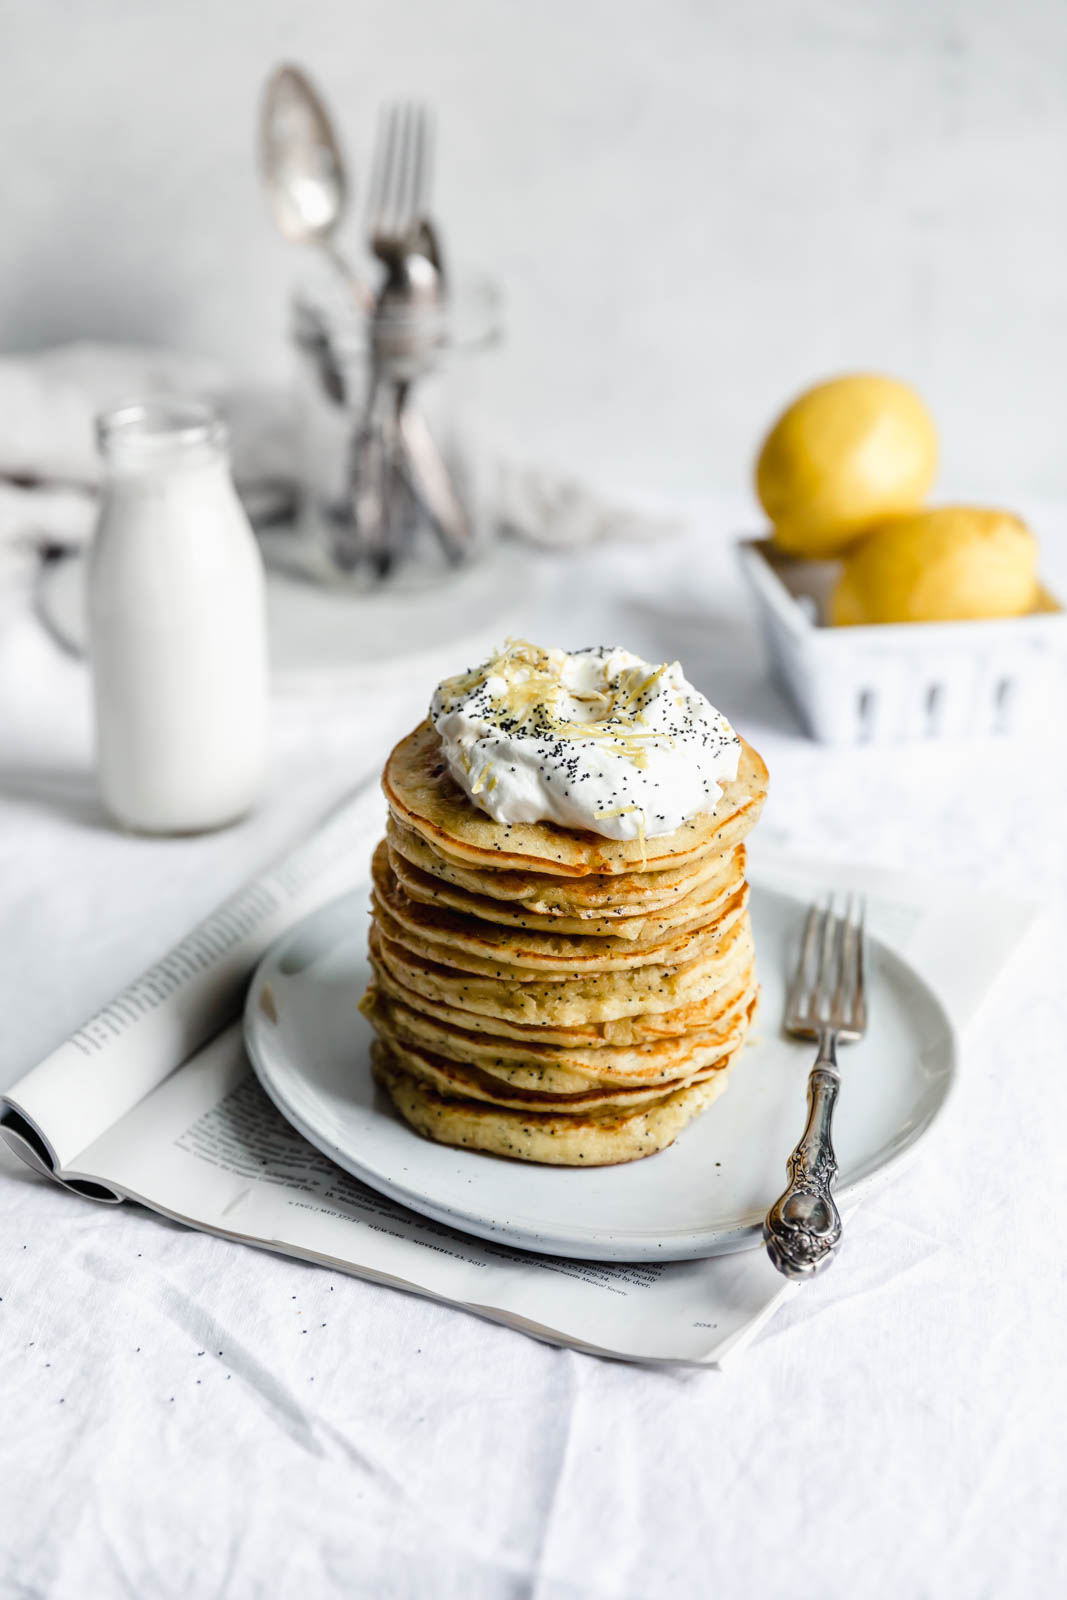 Light and fluffy Gluten Free Lemon Poppy Seed Pancakes made with almond flour and lemon zest. But proceed with caution: you might eat the whole batch!